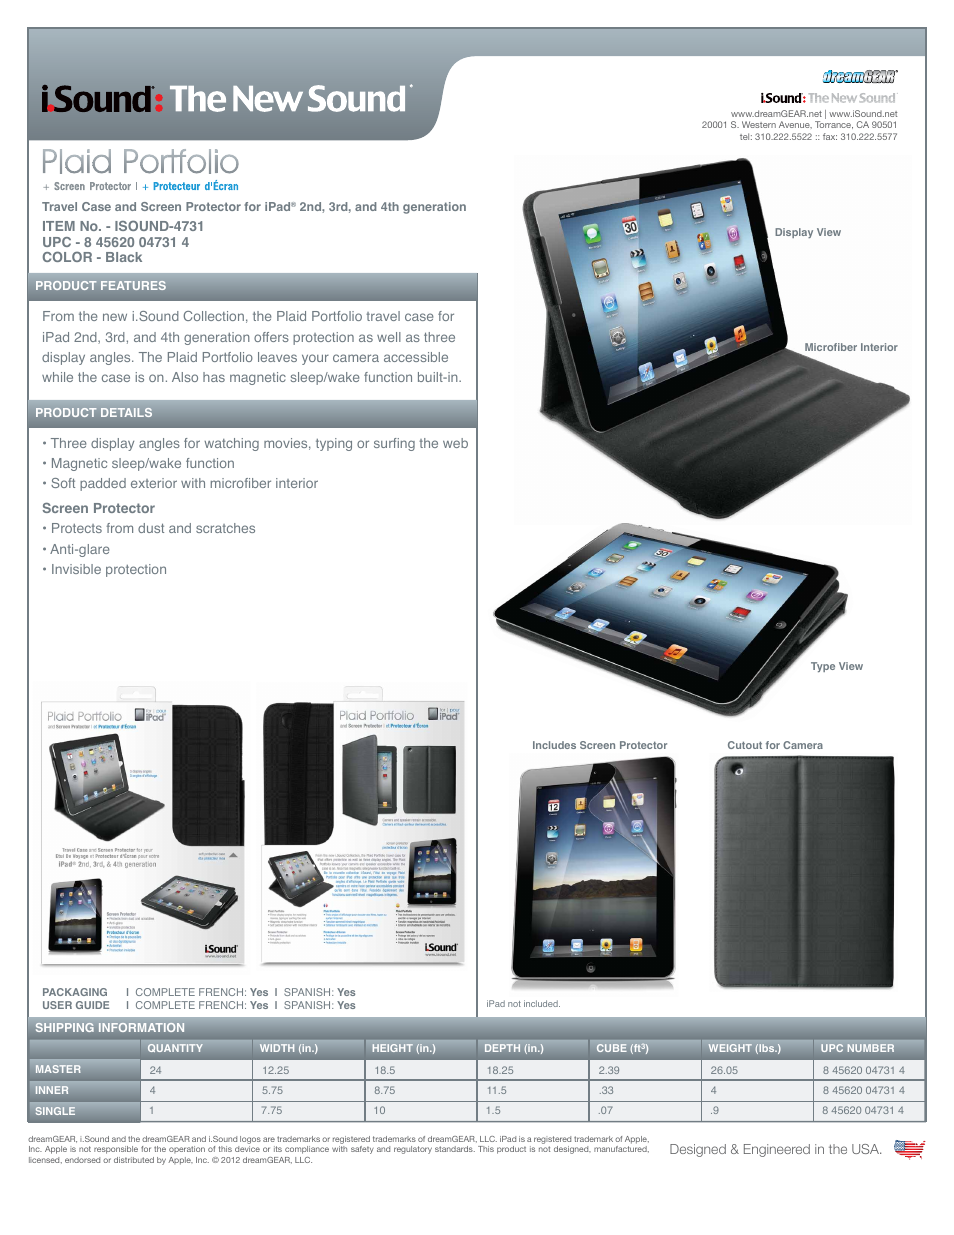 Plaid Portfolio for iPad 2nd, 3rd, and 4th generation - Sell Sheet